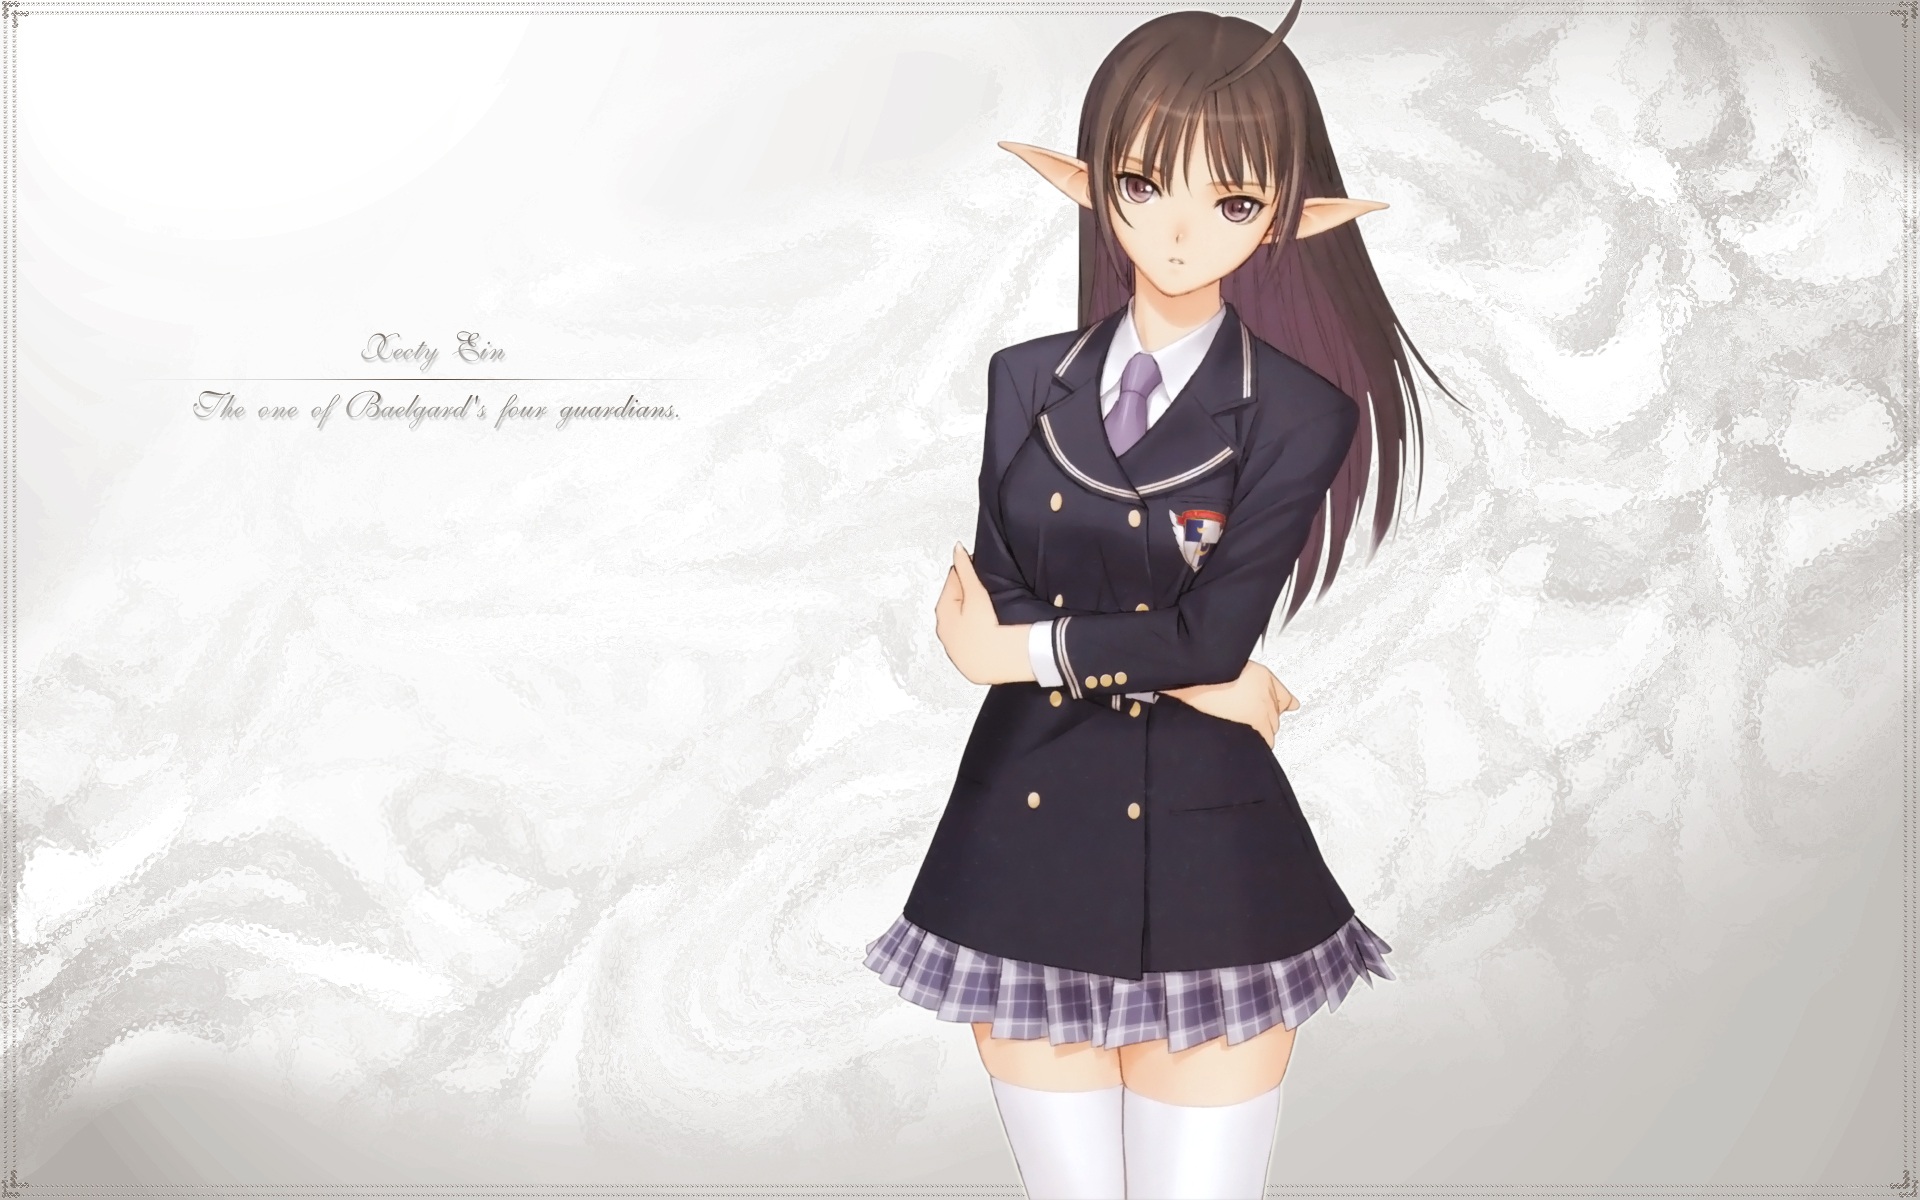 brunettes, video games, Tony Taka, school uniforms, tie, skirts, long hair, brown eyes, jackets, thigh highs, elves, anime, Shining Wind, simple background, pointy ears, Xecty Ein, Shining series - desktop wallpaper